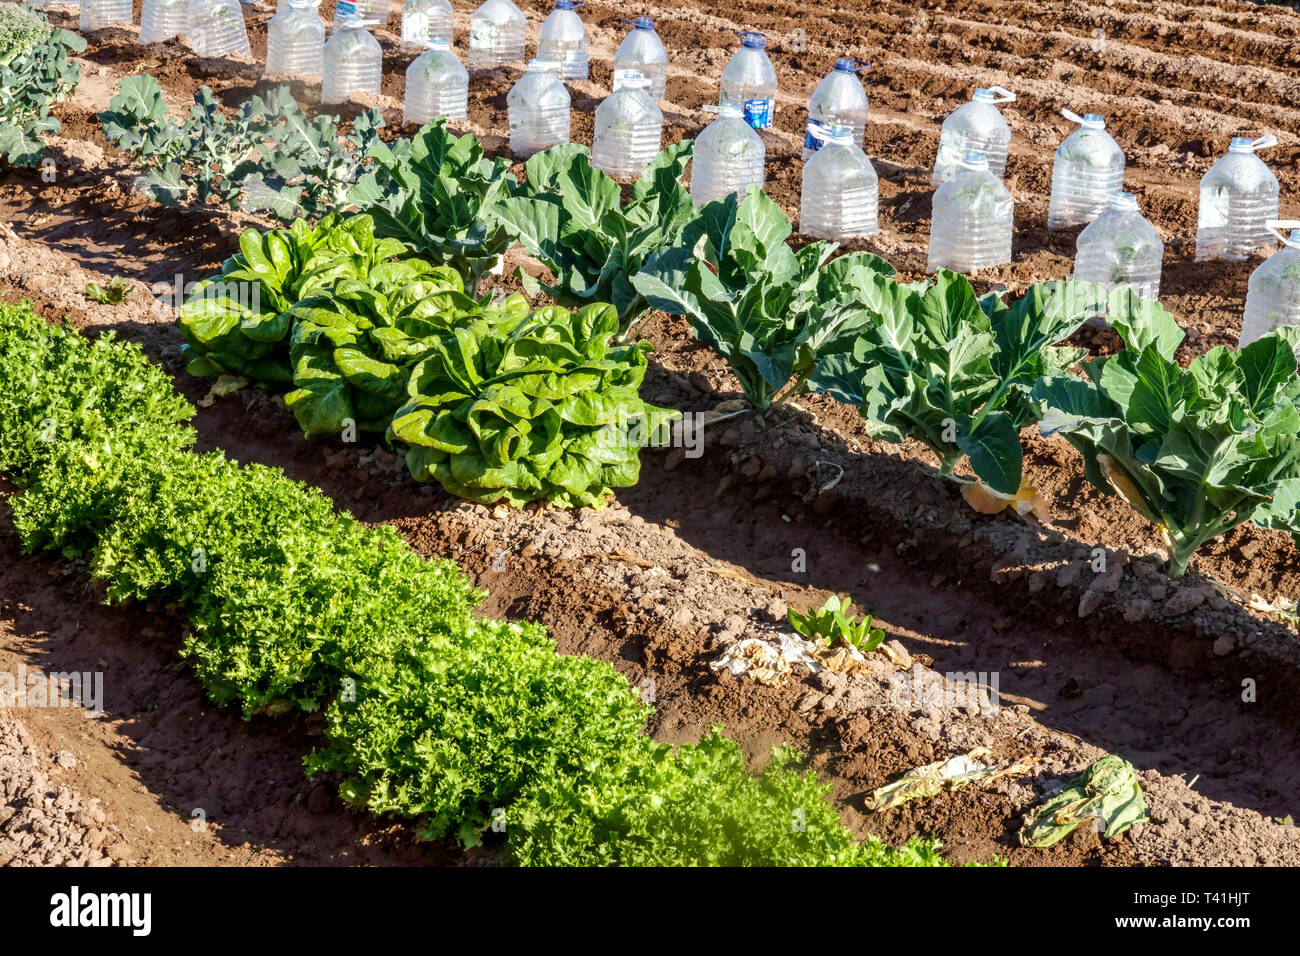 Plastic bottles protecting young plants from morning cold Stock Photo